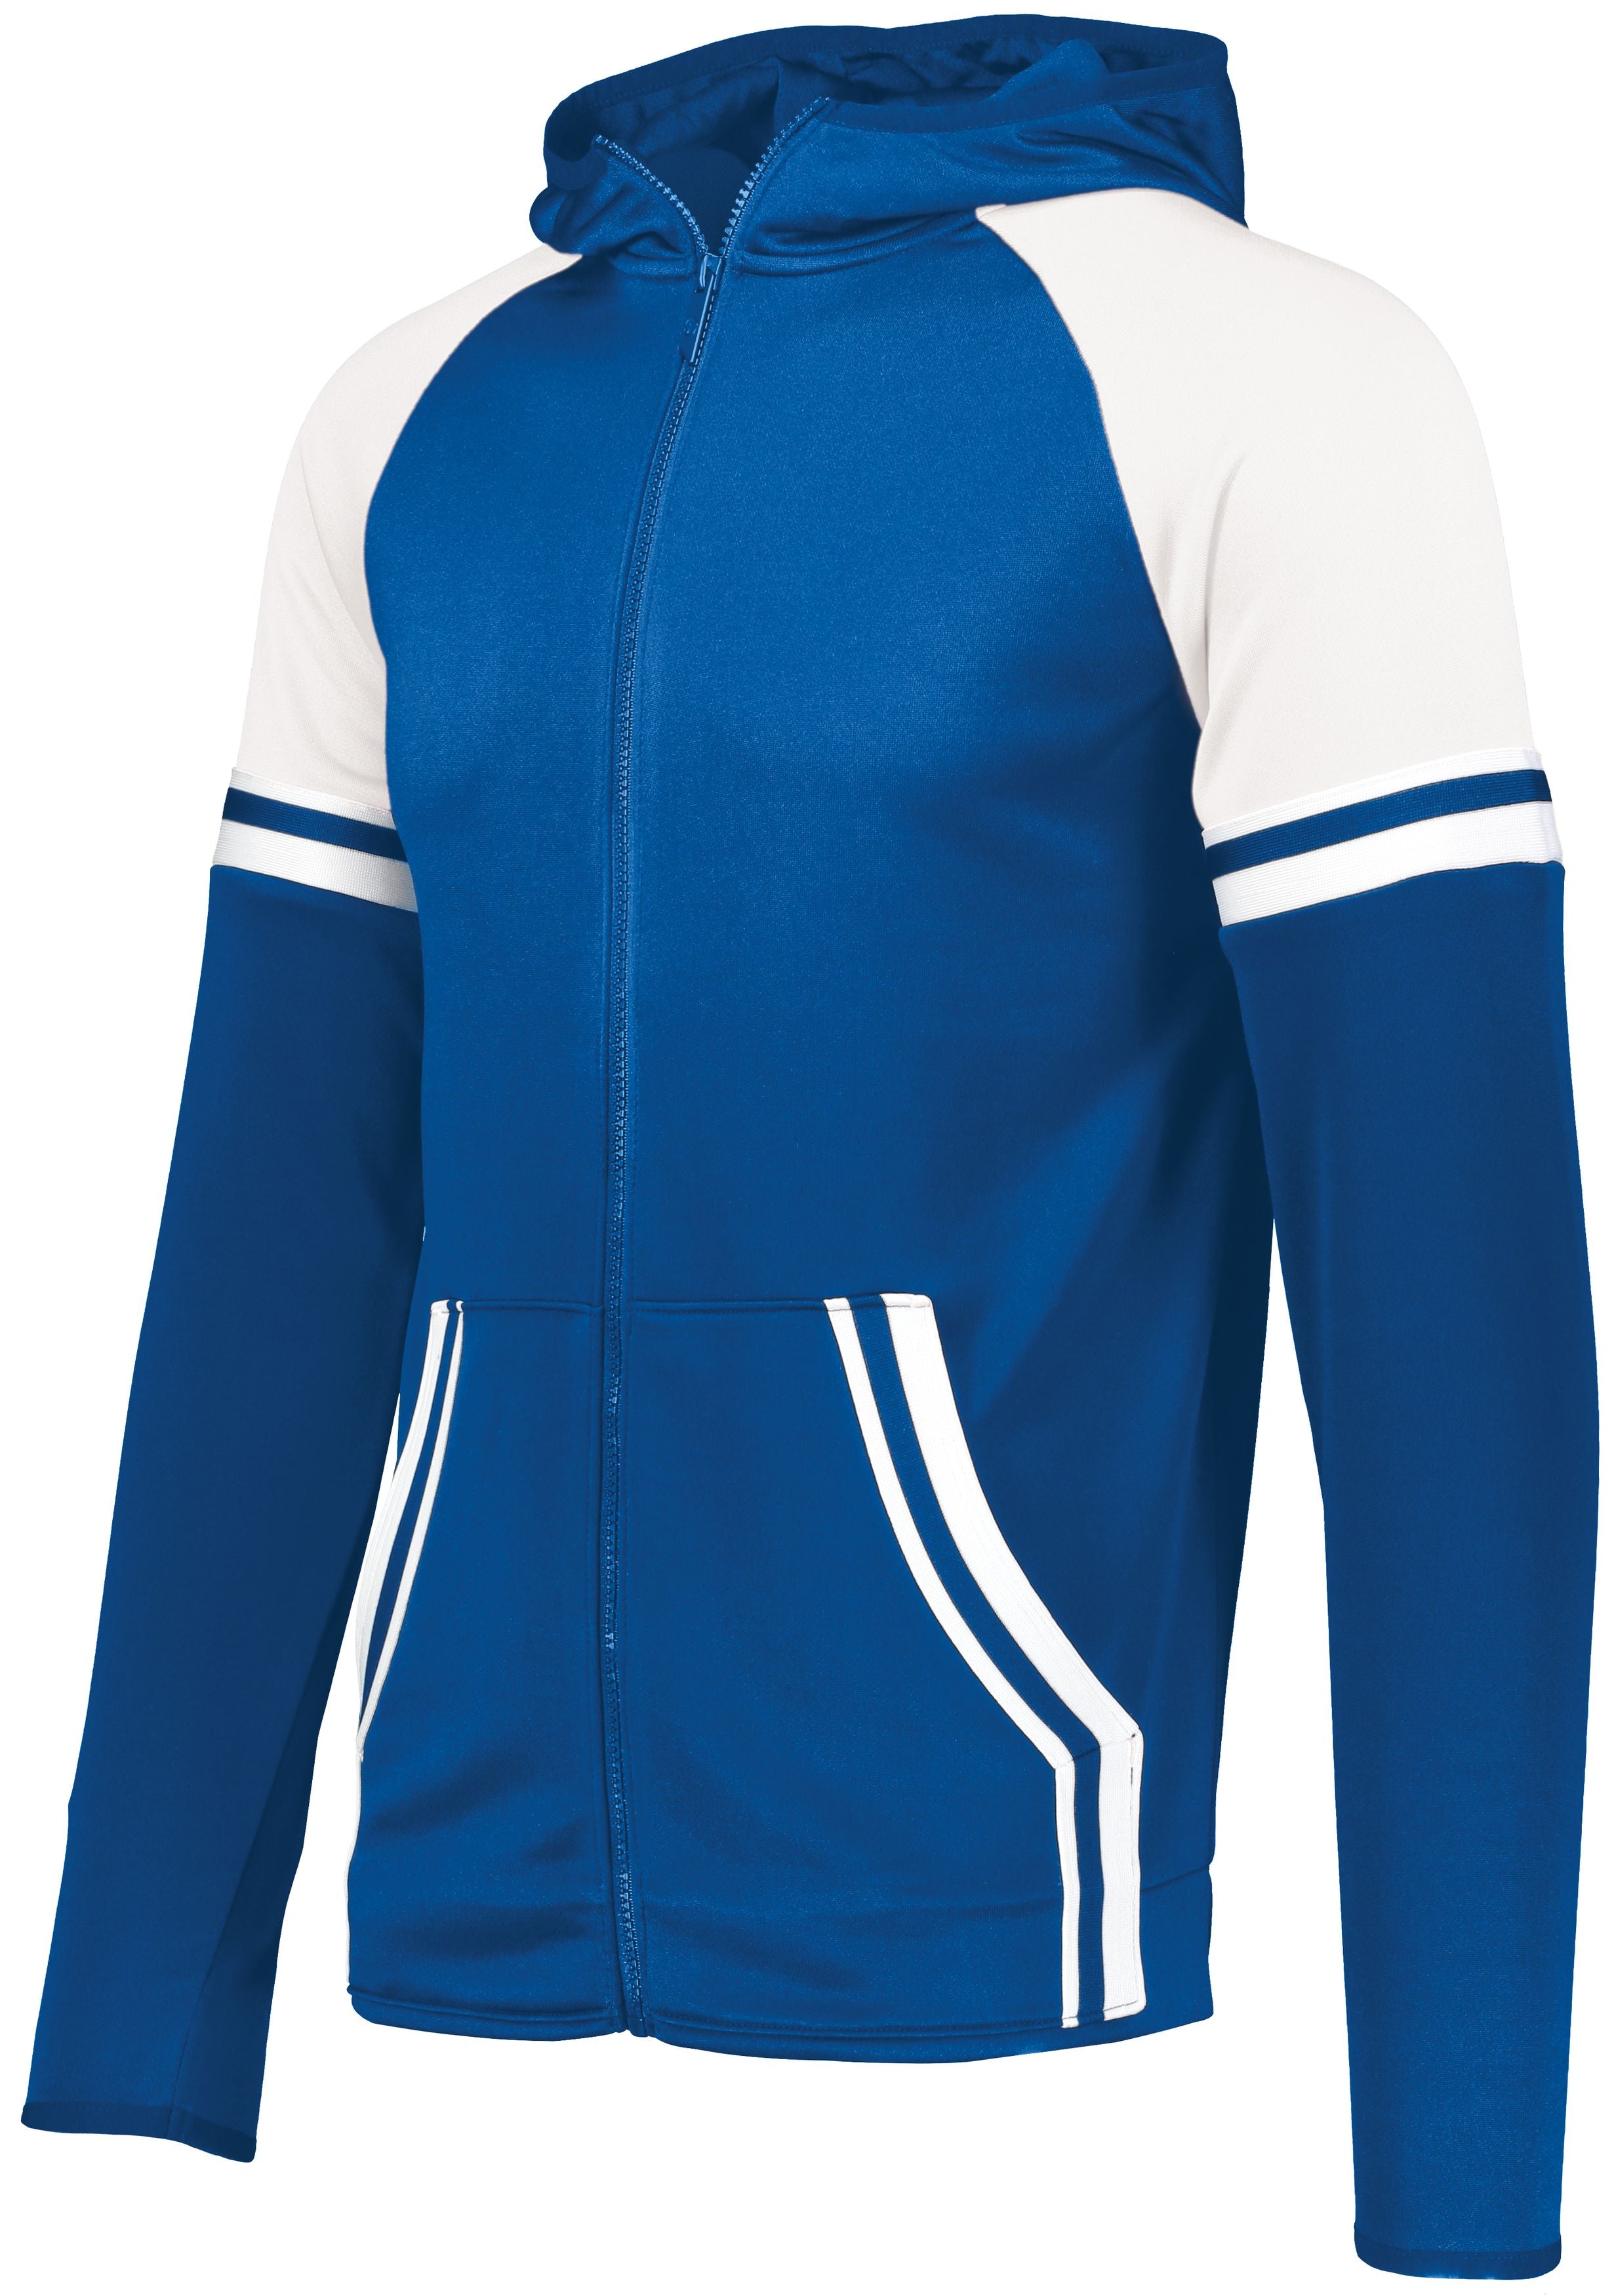 Holloway Youth Retro Grade Jacket in Royal/White  -Part of the Youth, Youth-Jacket, Holloway, Outerwear product lines at KanaleyCreations.com